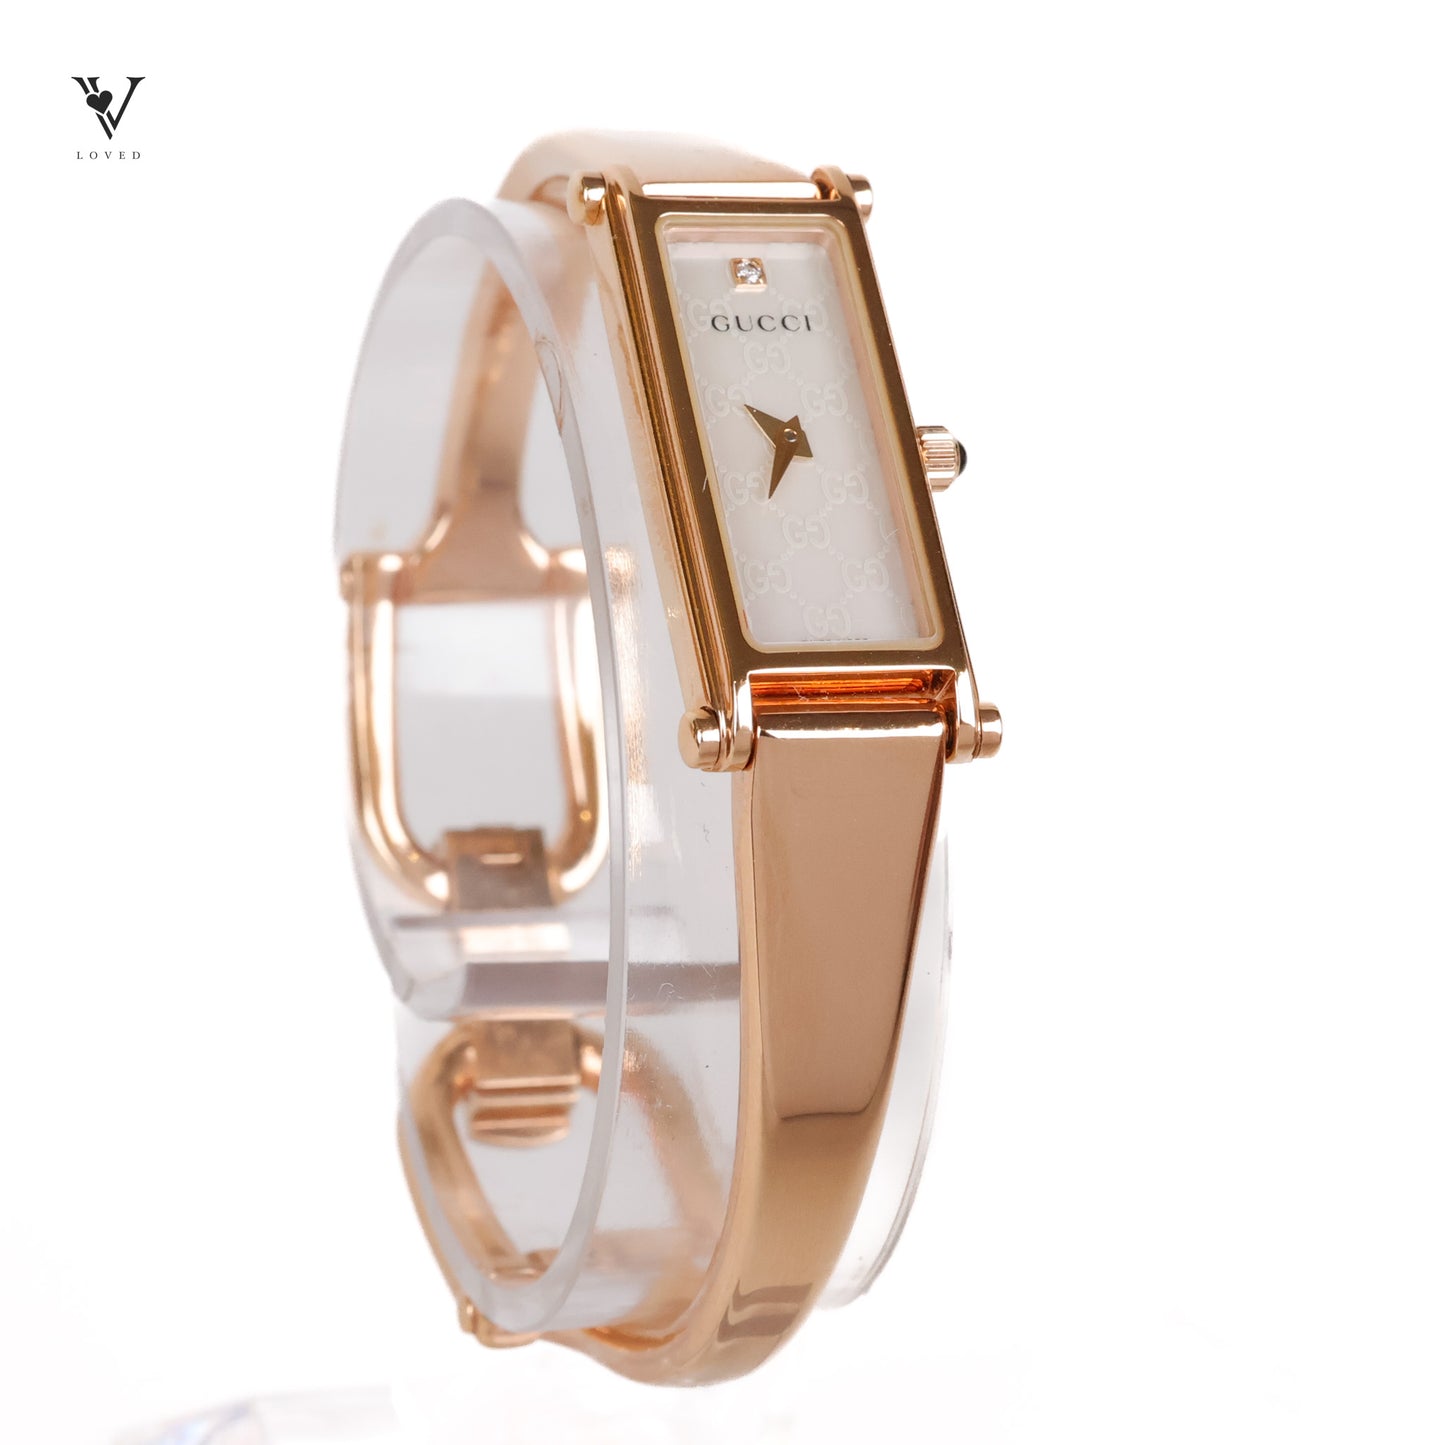 Bangle Watch in Gold